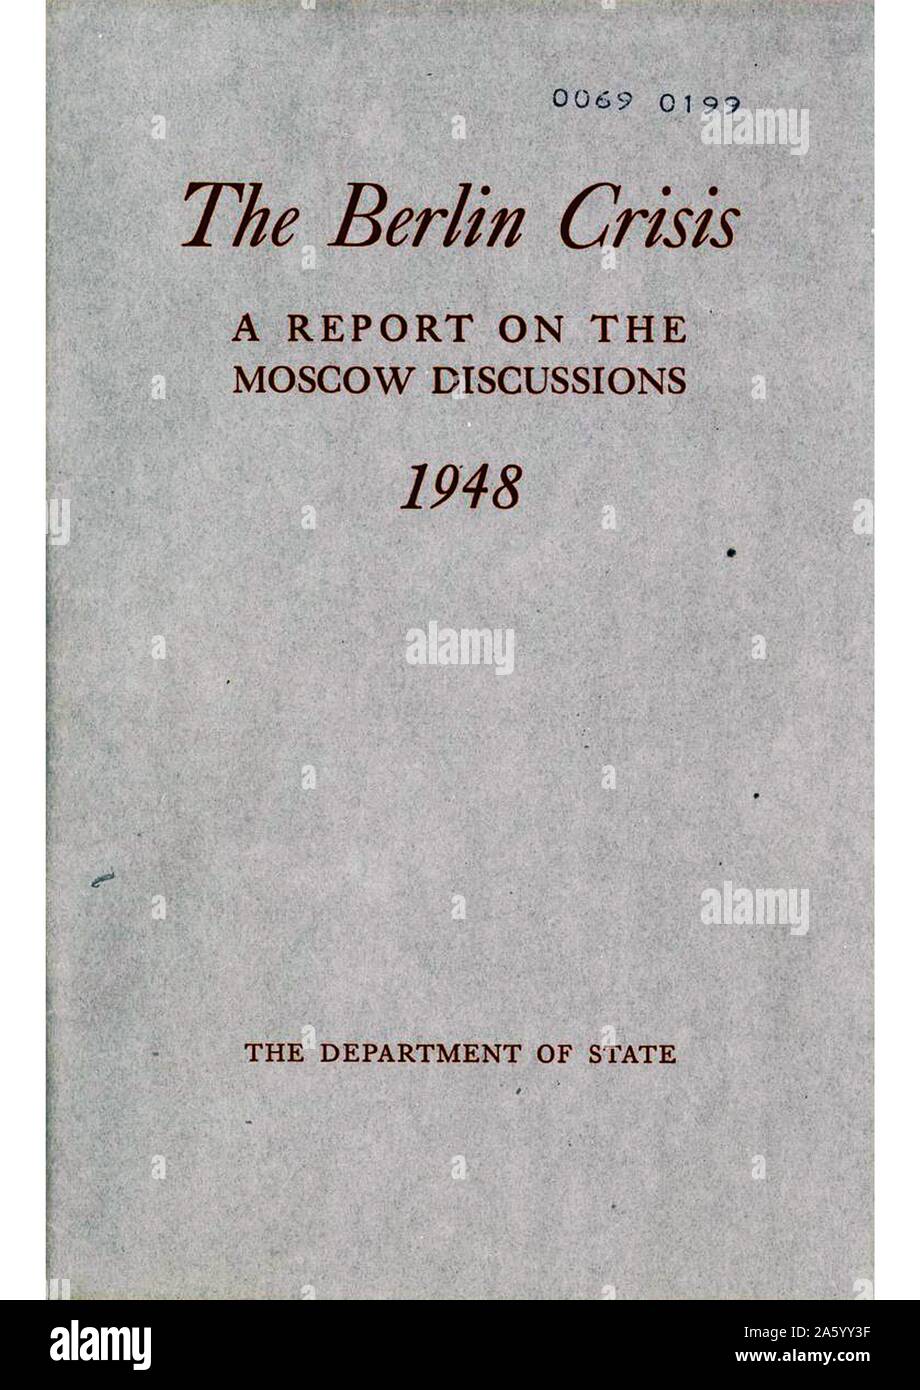 TUS department of State report on the Berlin Blockade . he Berlin Blockade (1 April 1948 – 12 May 1949) was one of the first major international crises of the Cold War Stock Photo